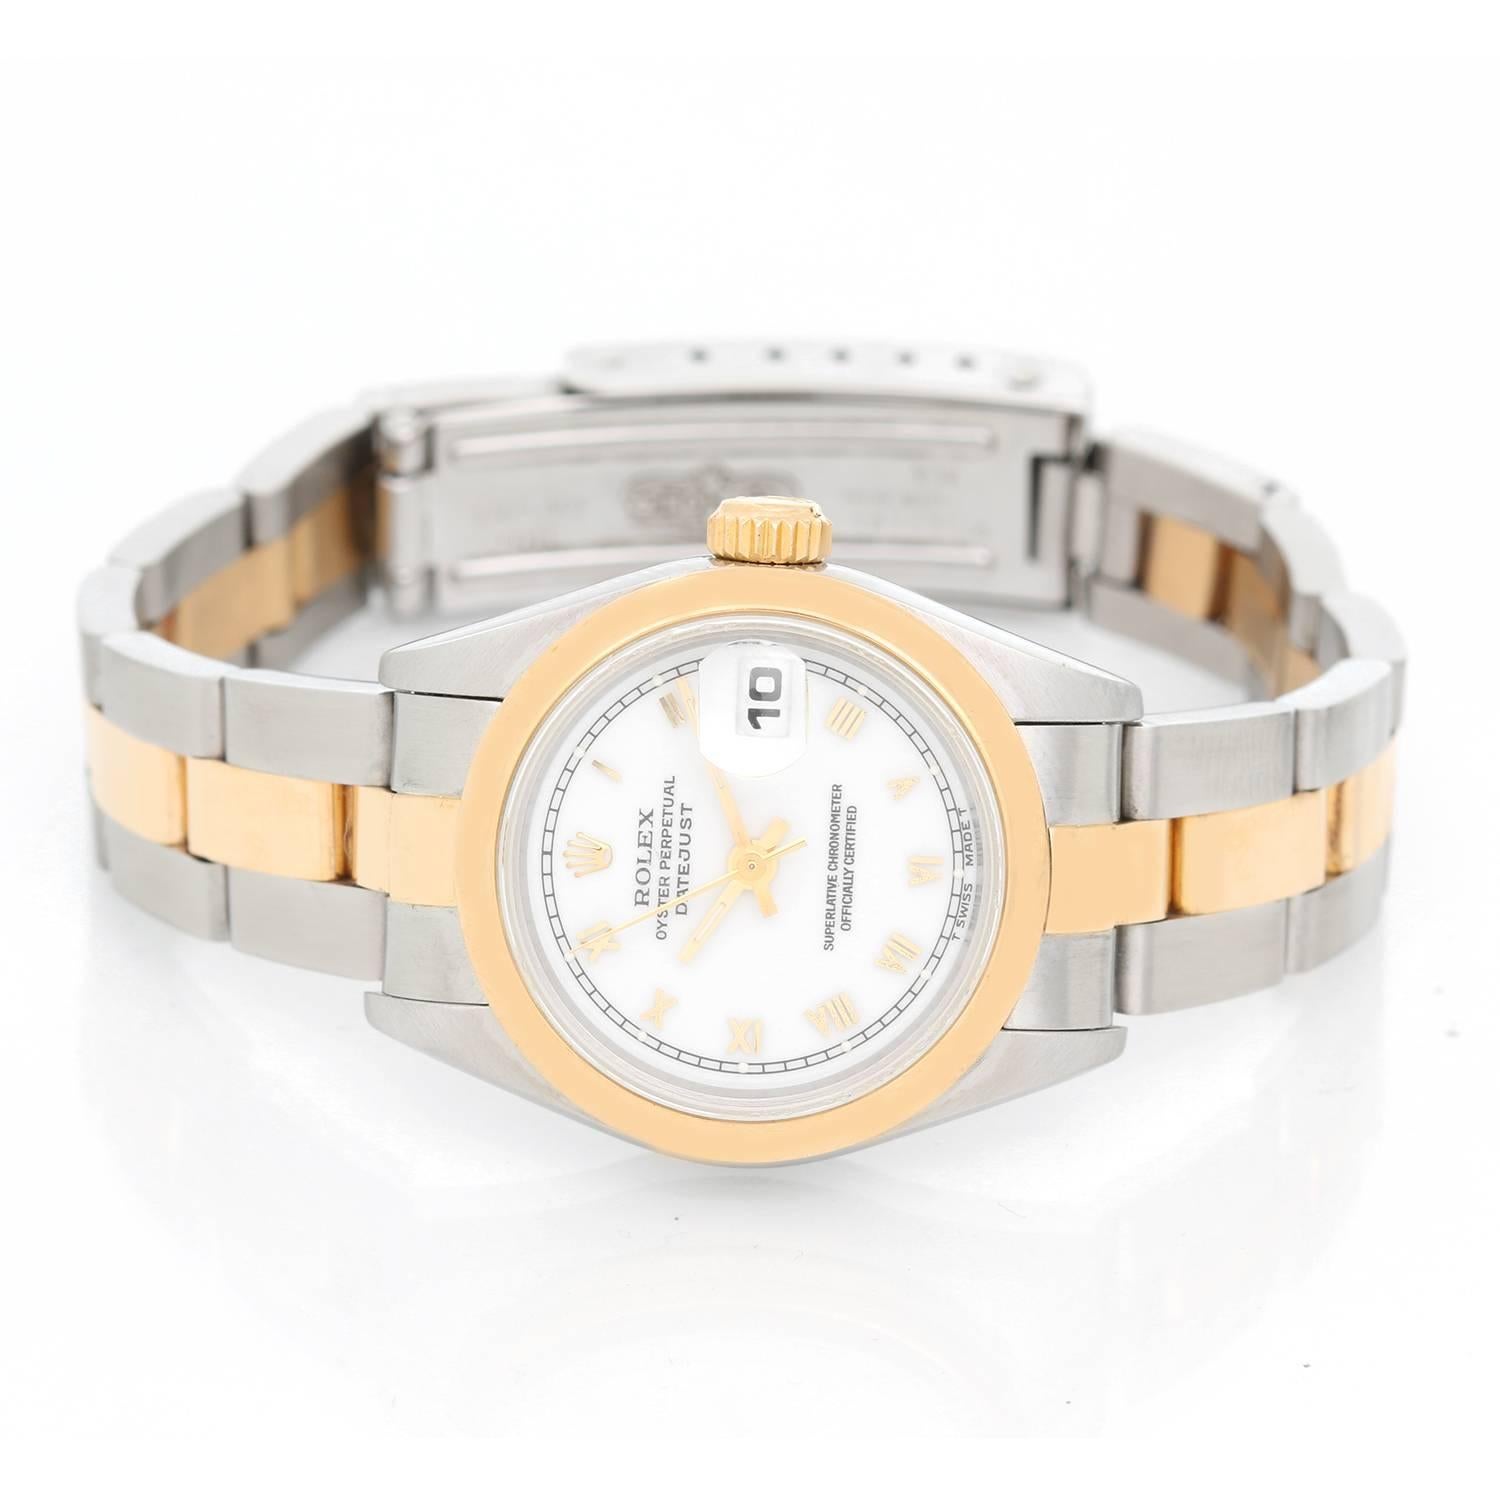 Rolex Datejust 2-Tone Ladies Watch 69173 -  Automatic winding, 29 jewels, Quickset date, sapphire crystal. Stainless steel case with smooth bezel (26mm diameter). White dial with Roman numerals. Stainless steel and 18k yellow gold oyster bracelet.